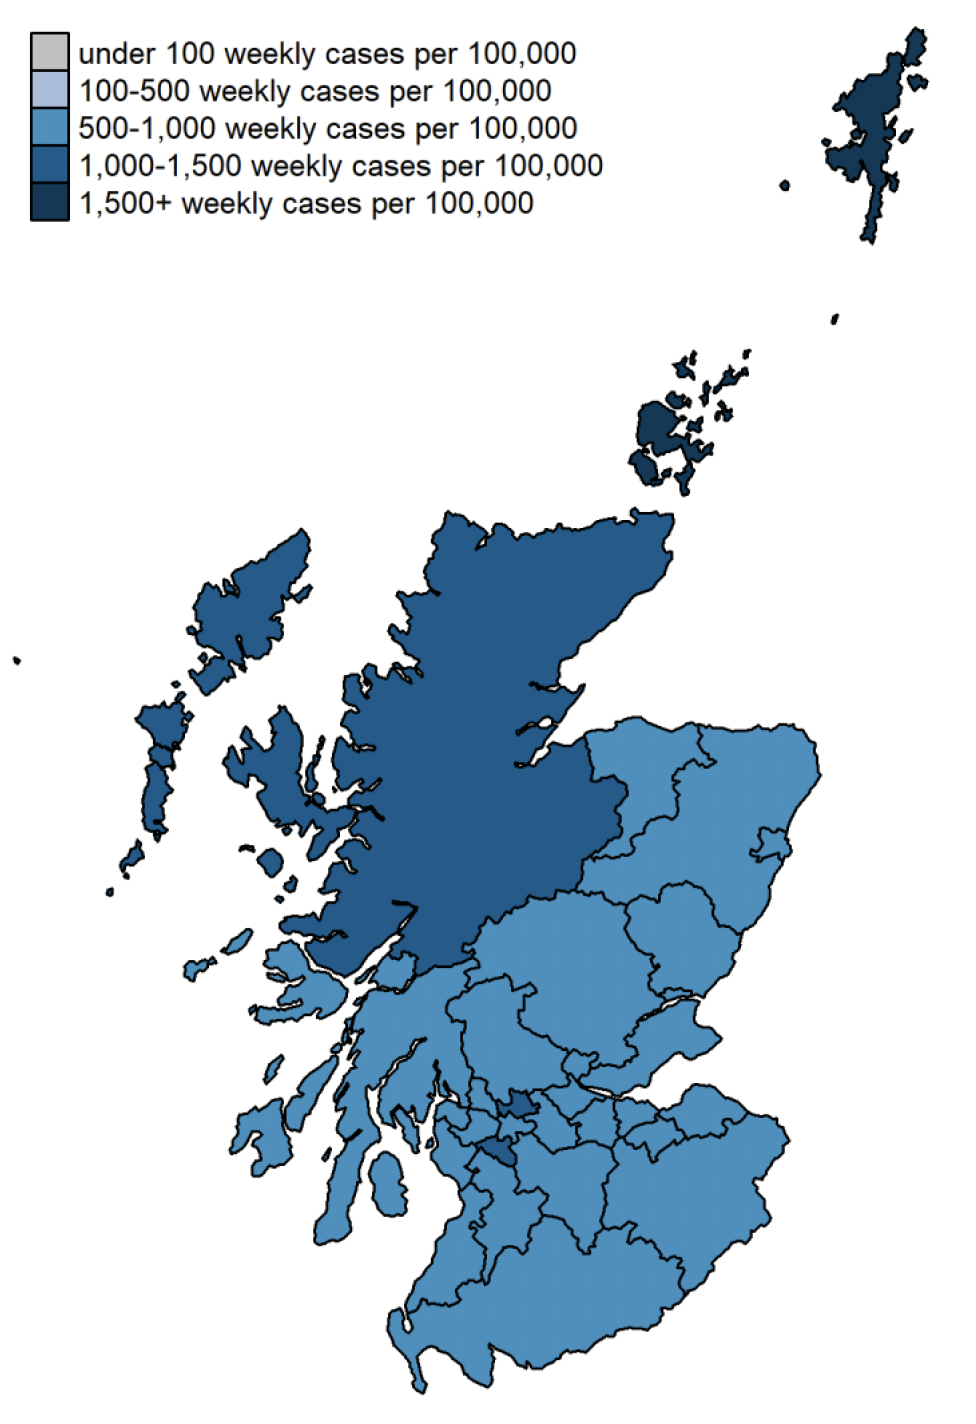 one colour coded map showing positive LFD and PCR weekly cases per 100,000 people by specimen date in each local authority in Scotland on 26 February 2022. The map ranges from grey for under 100 weekly cases per 100,000, through very light blue for 100-500, blue for 500-1,000, darker blue for 1,000-1,500, and very dark blue for over 1,500 weekly cases per 100,000 people.